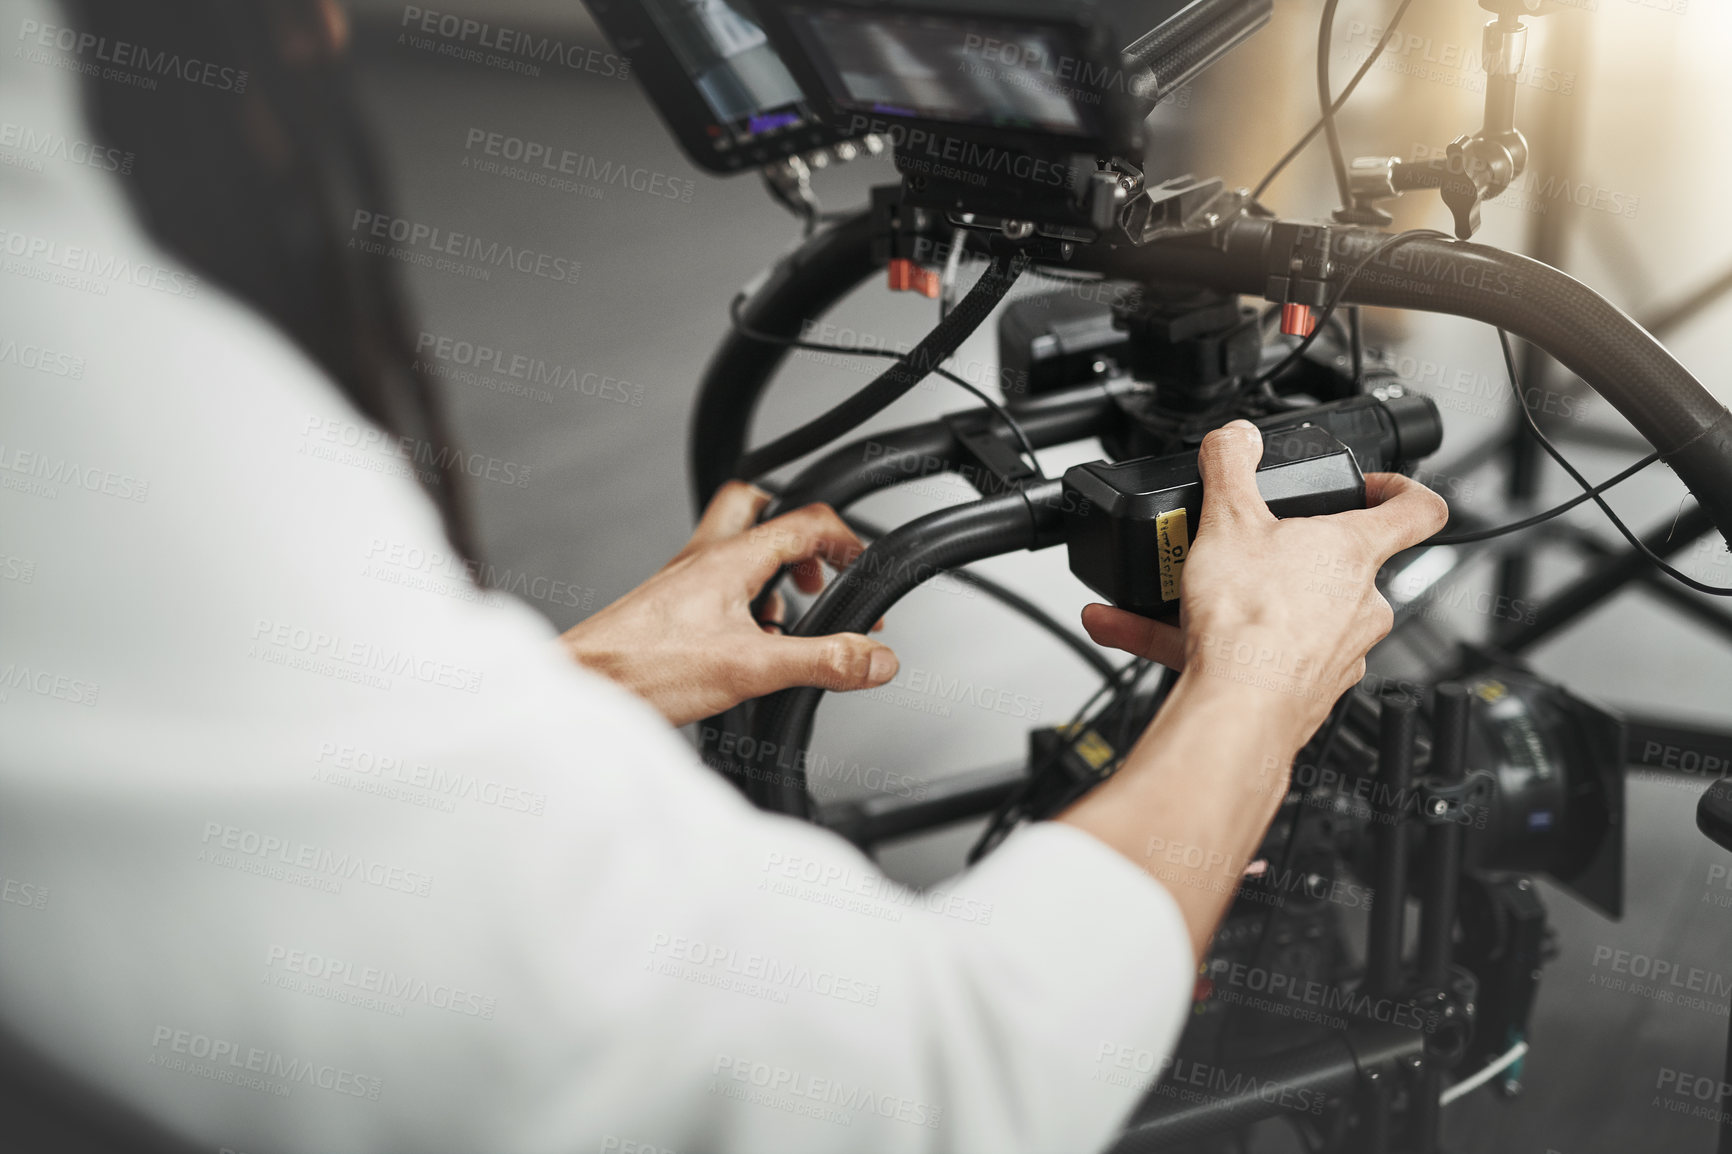 Buy stock photo Behind the scenes over the shoulder shot of an unrecognizable person operating a state of the art video camera inside of a studio